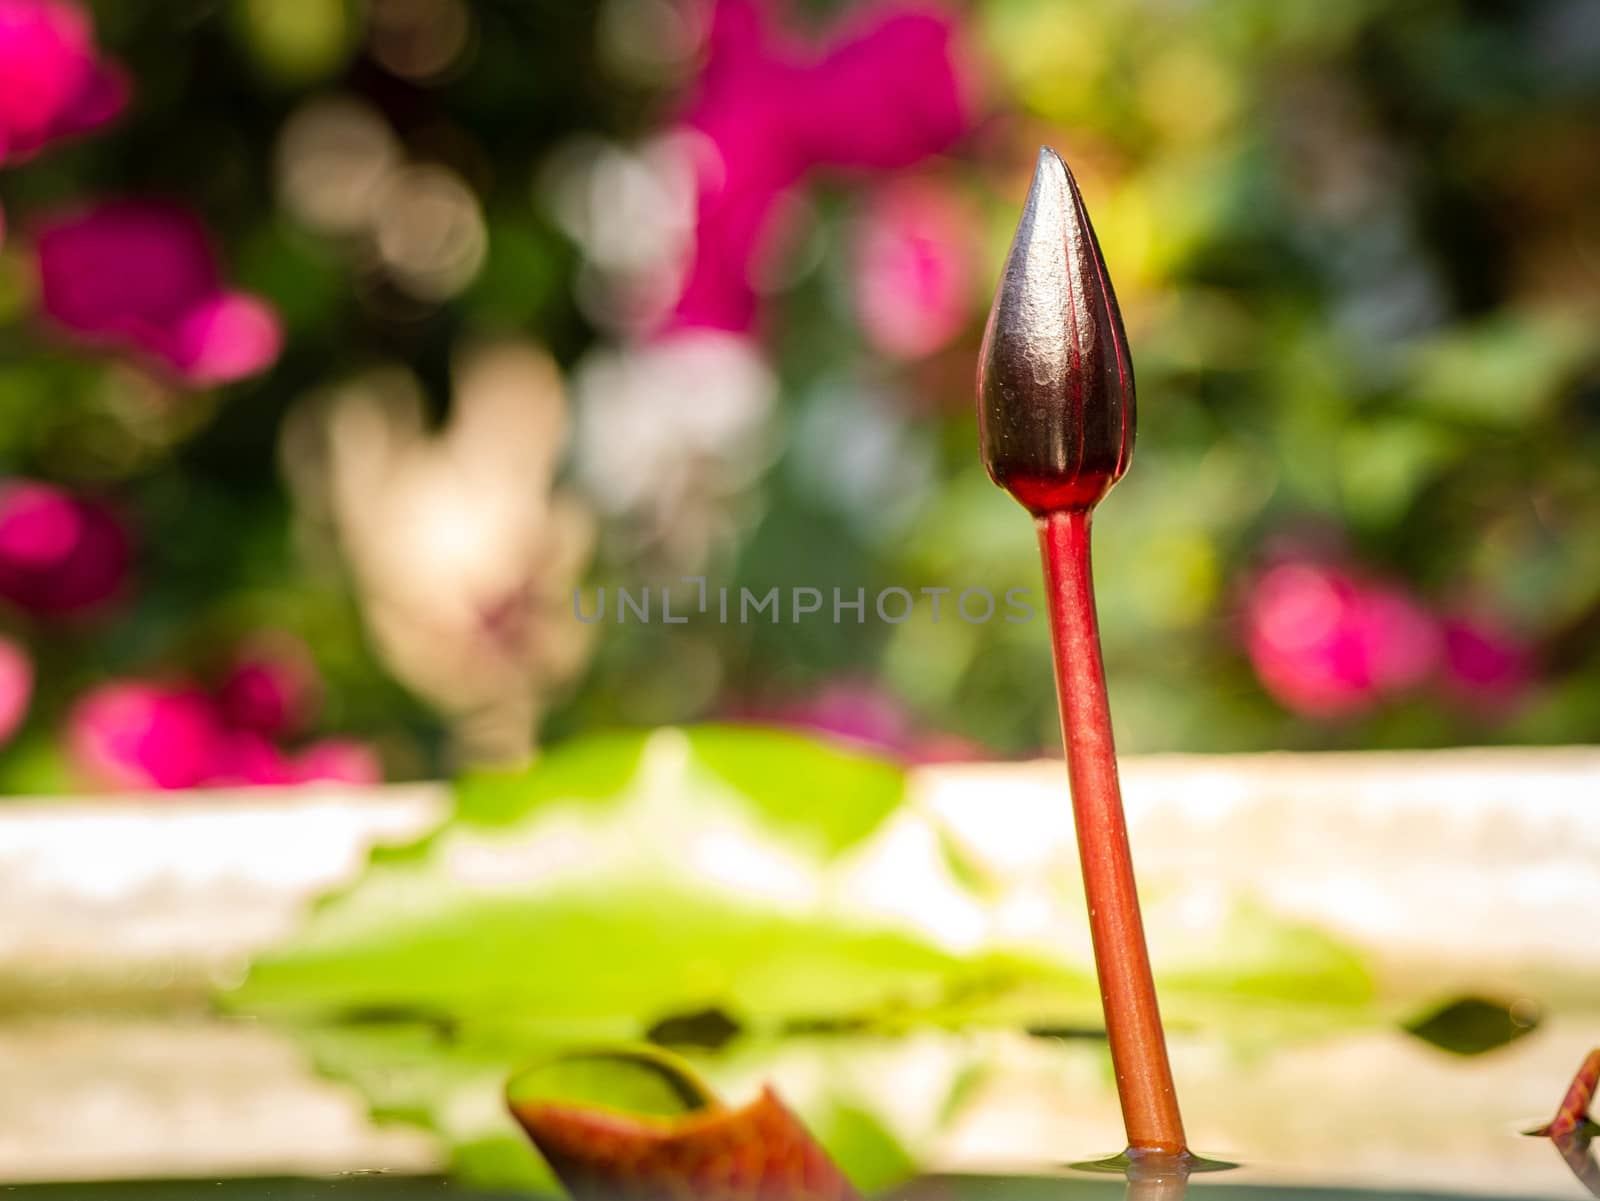 Lotus bud in the pond in the backyard on nature blurred backgrouLotus bud in the pond in the backyard on nature blurred background. by TEERASAK